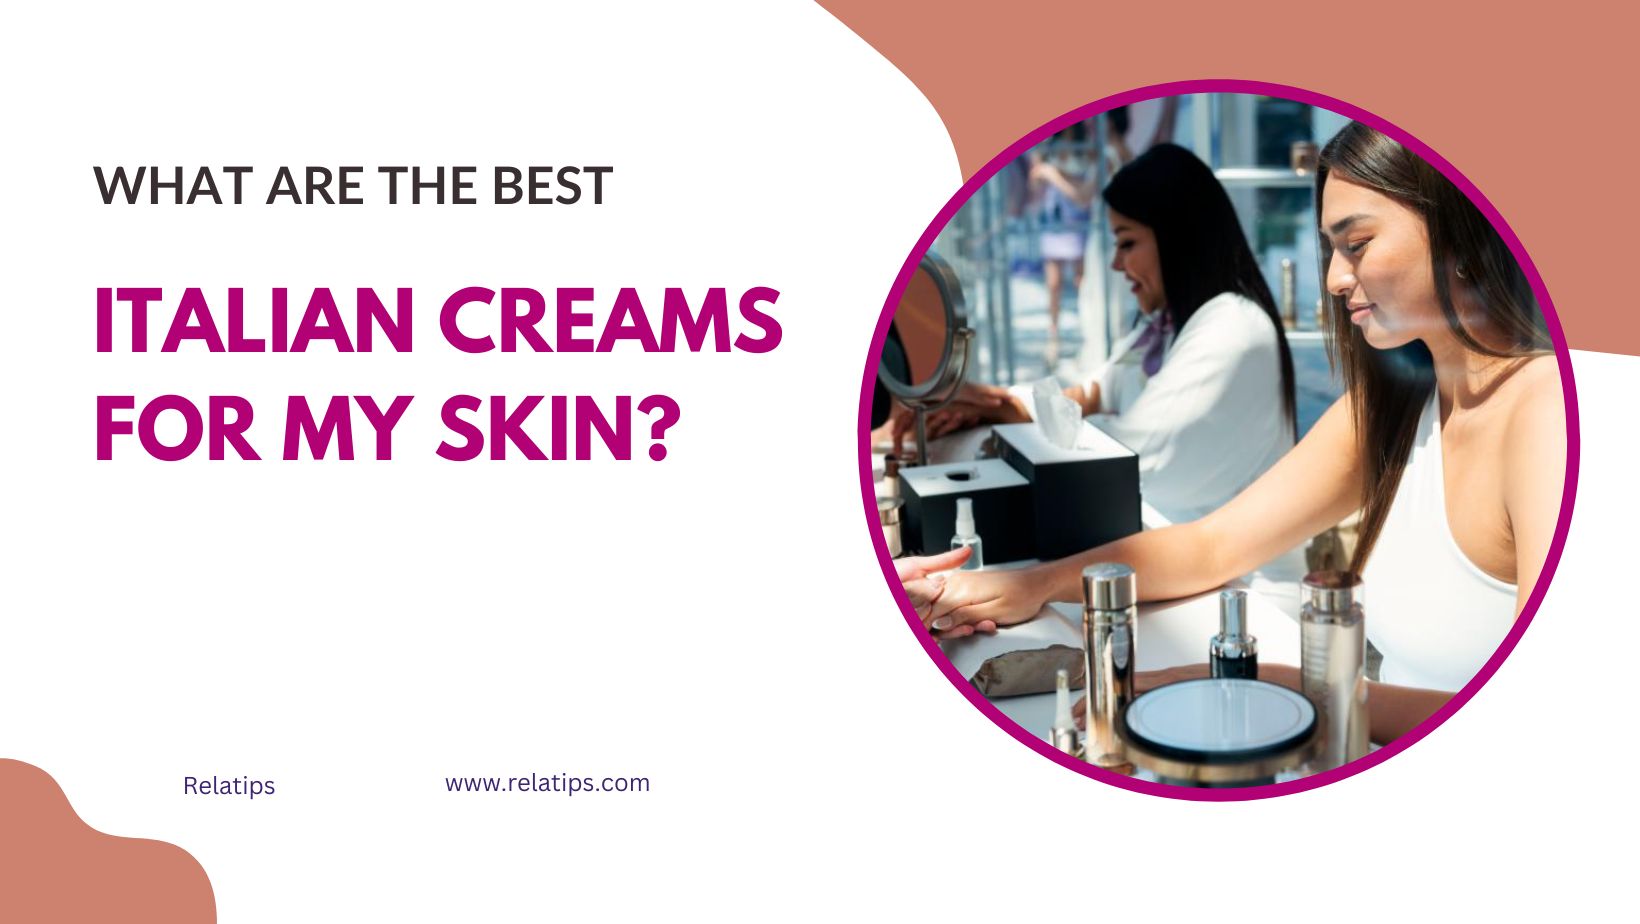 What Are the Best Italian Creams For My Skin?